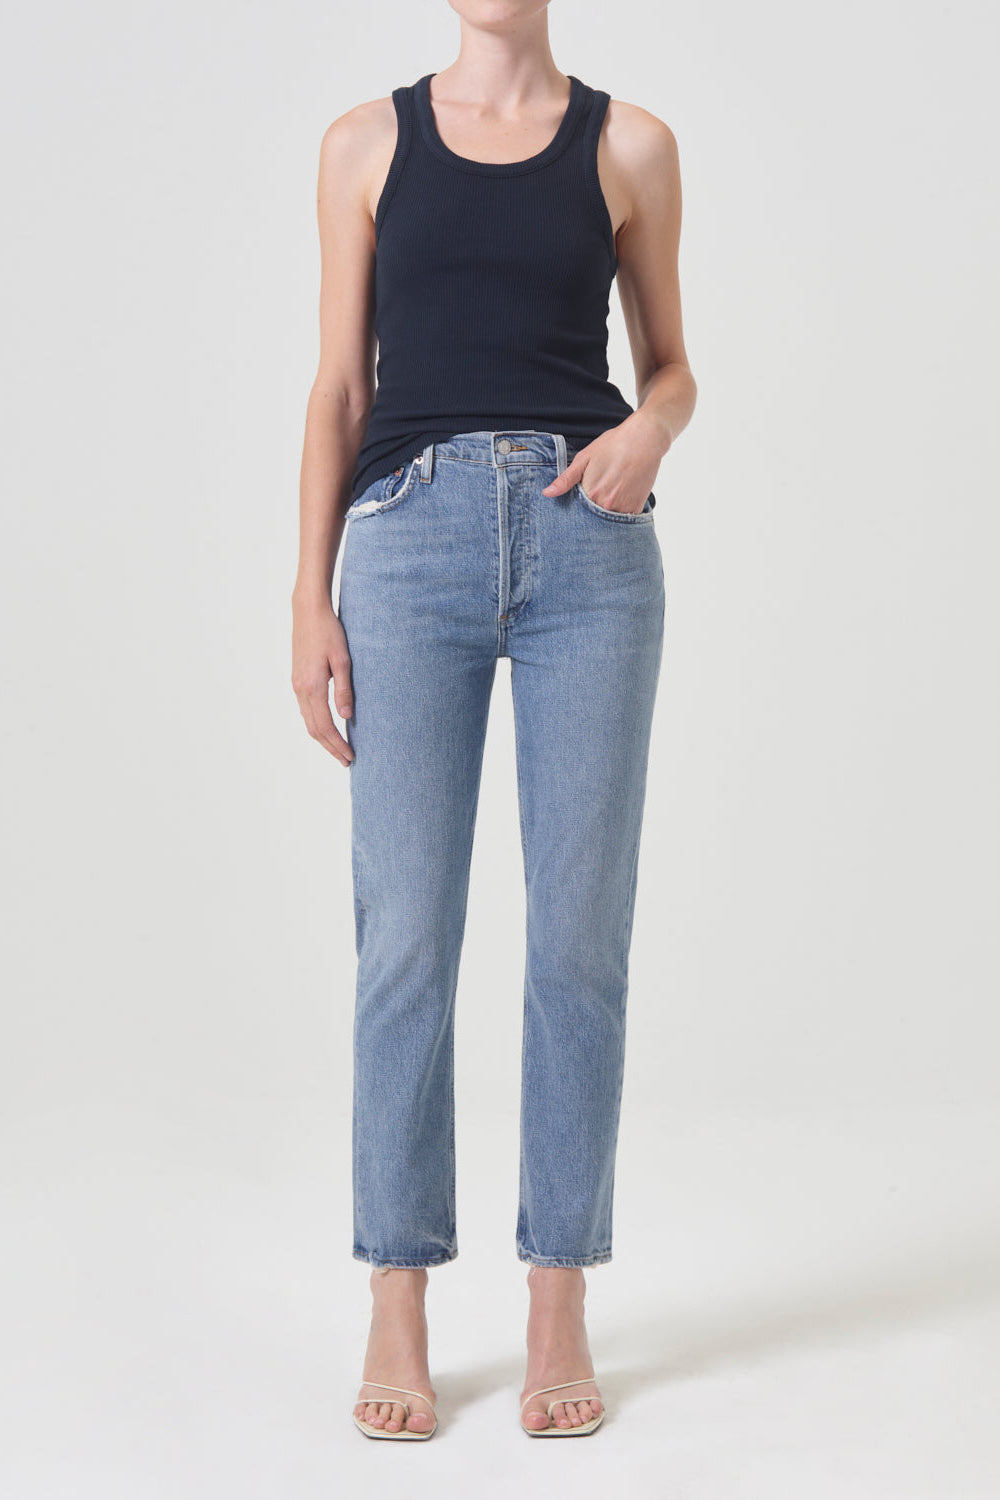 Jeans Riley High Rise in QuiverAgolde - Anita Hass